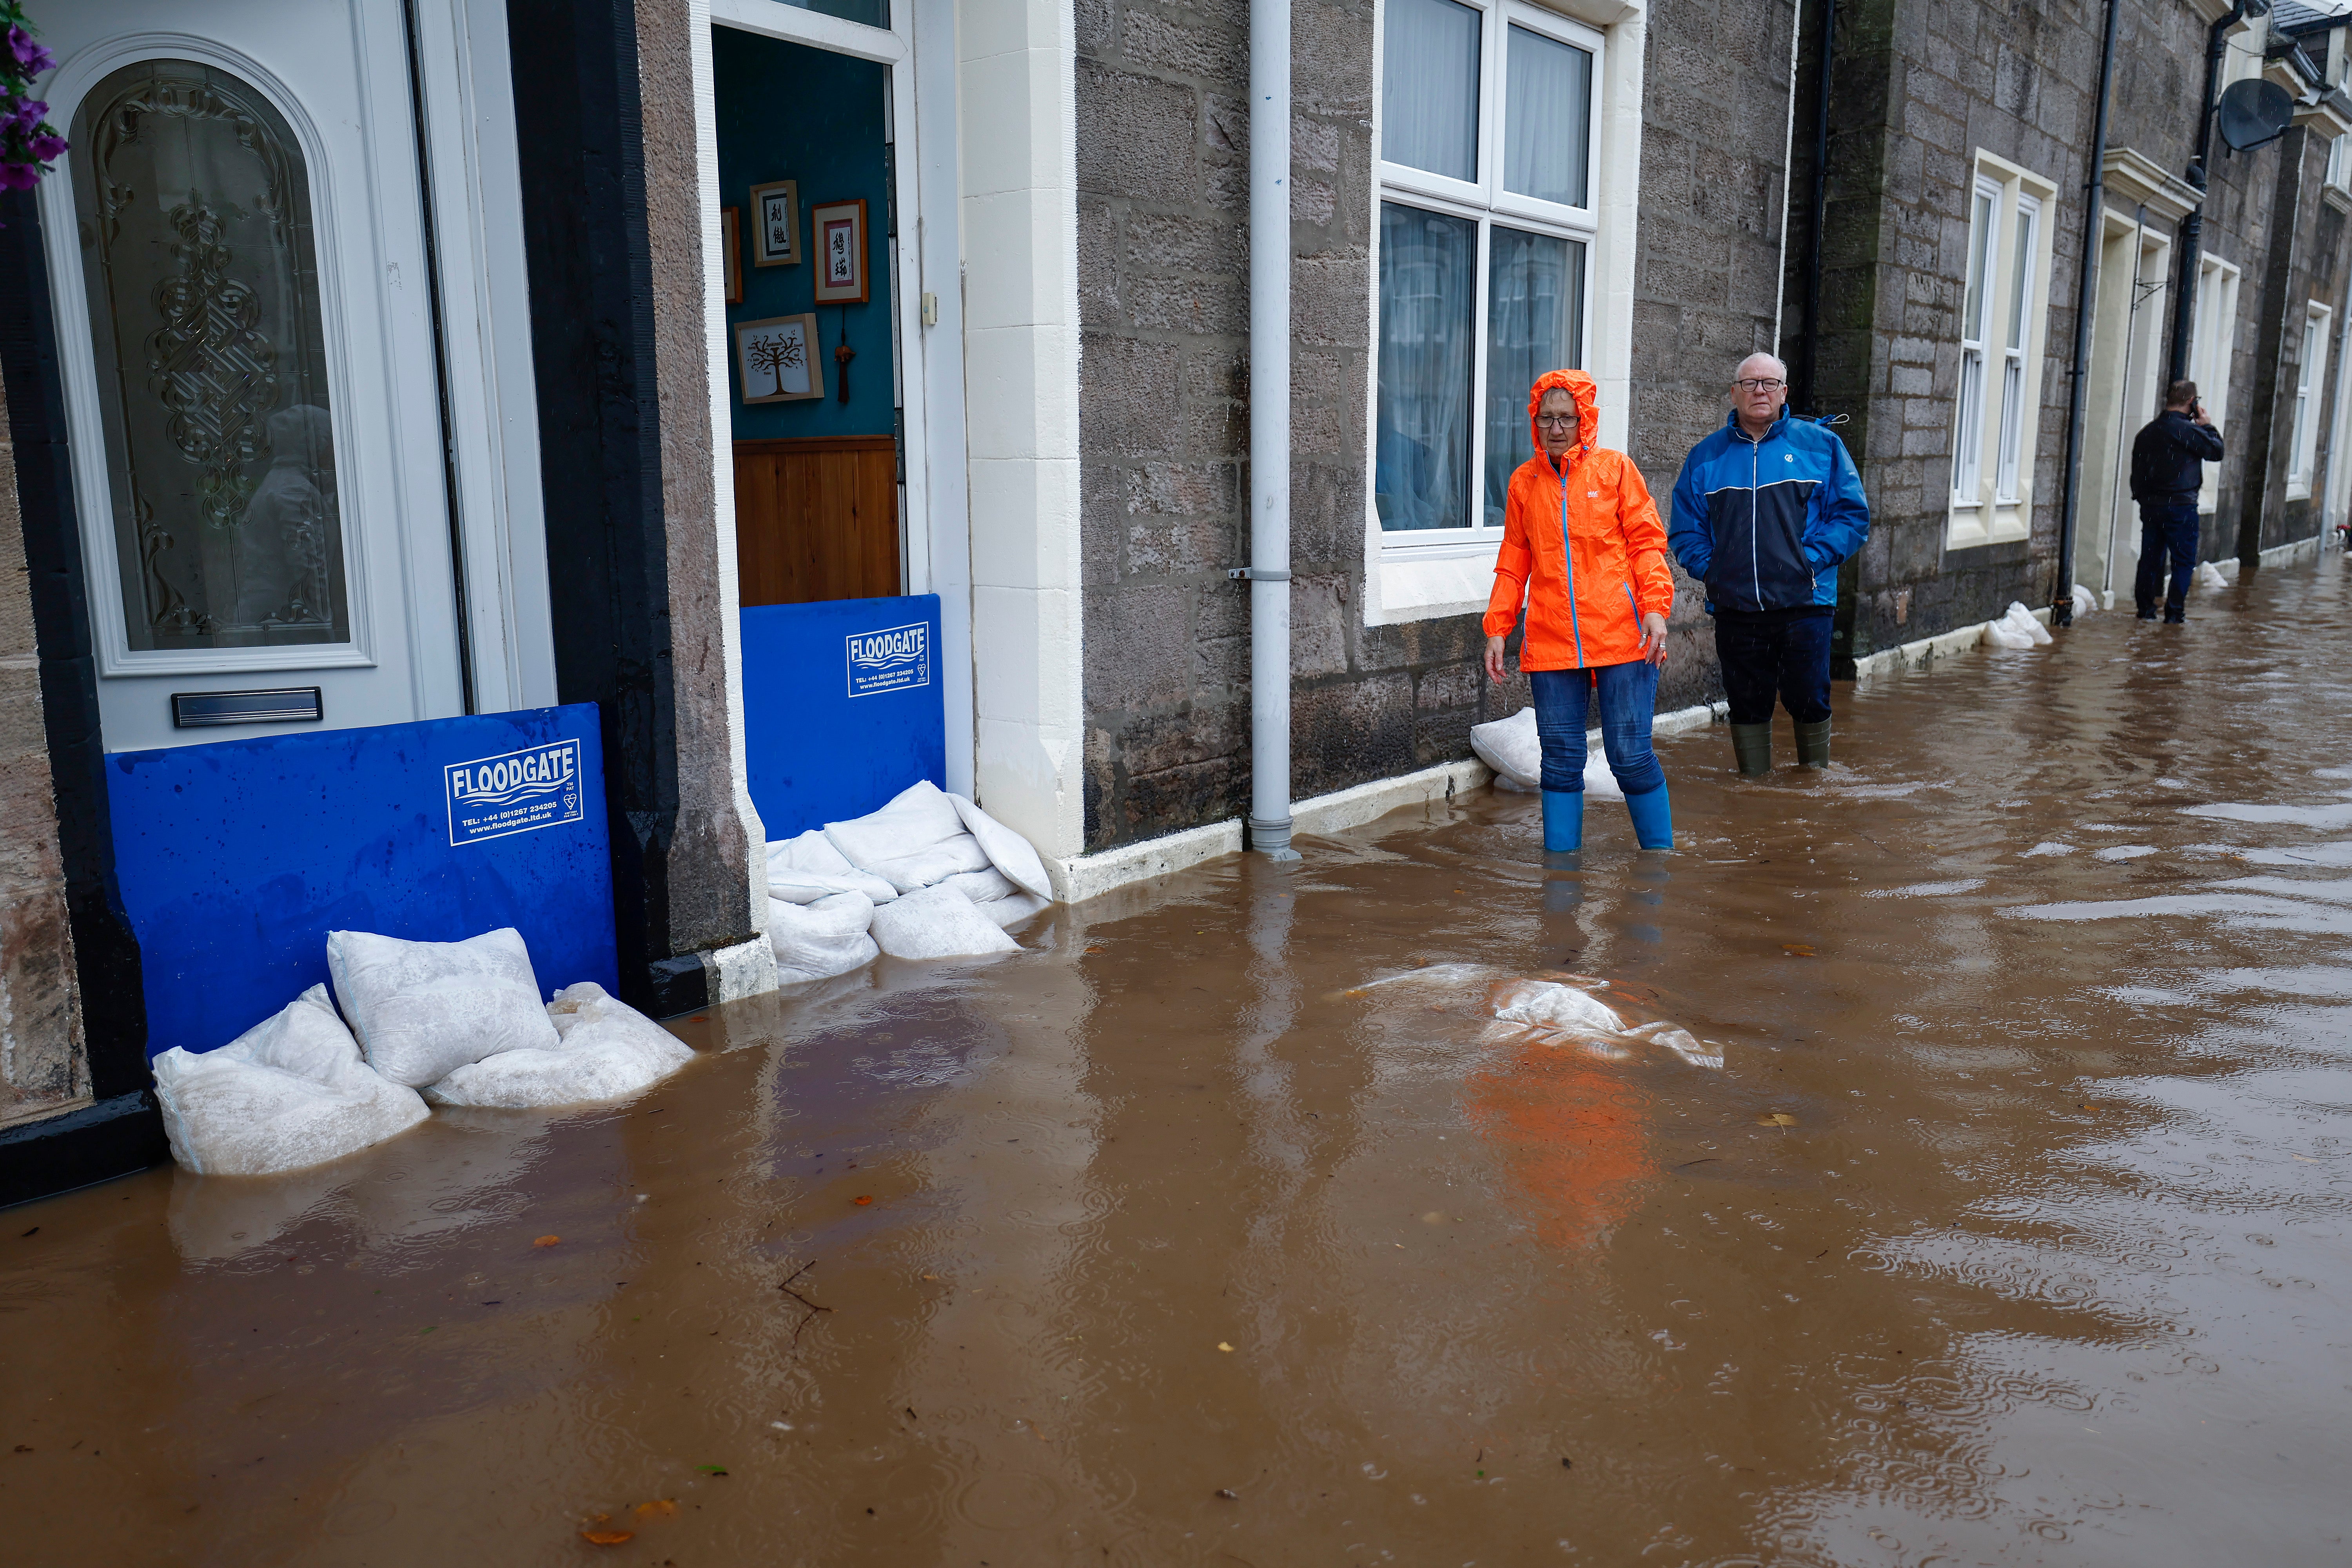 Members of the public struggle with flooding as torrential rain continues in Dumbarton